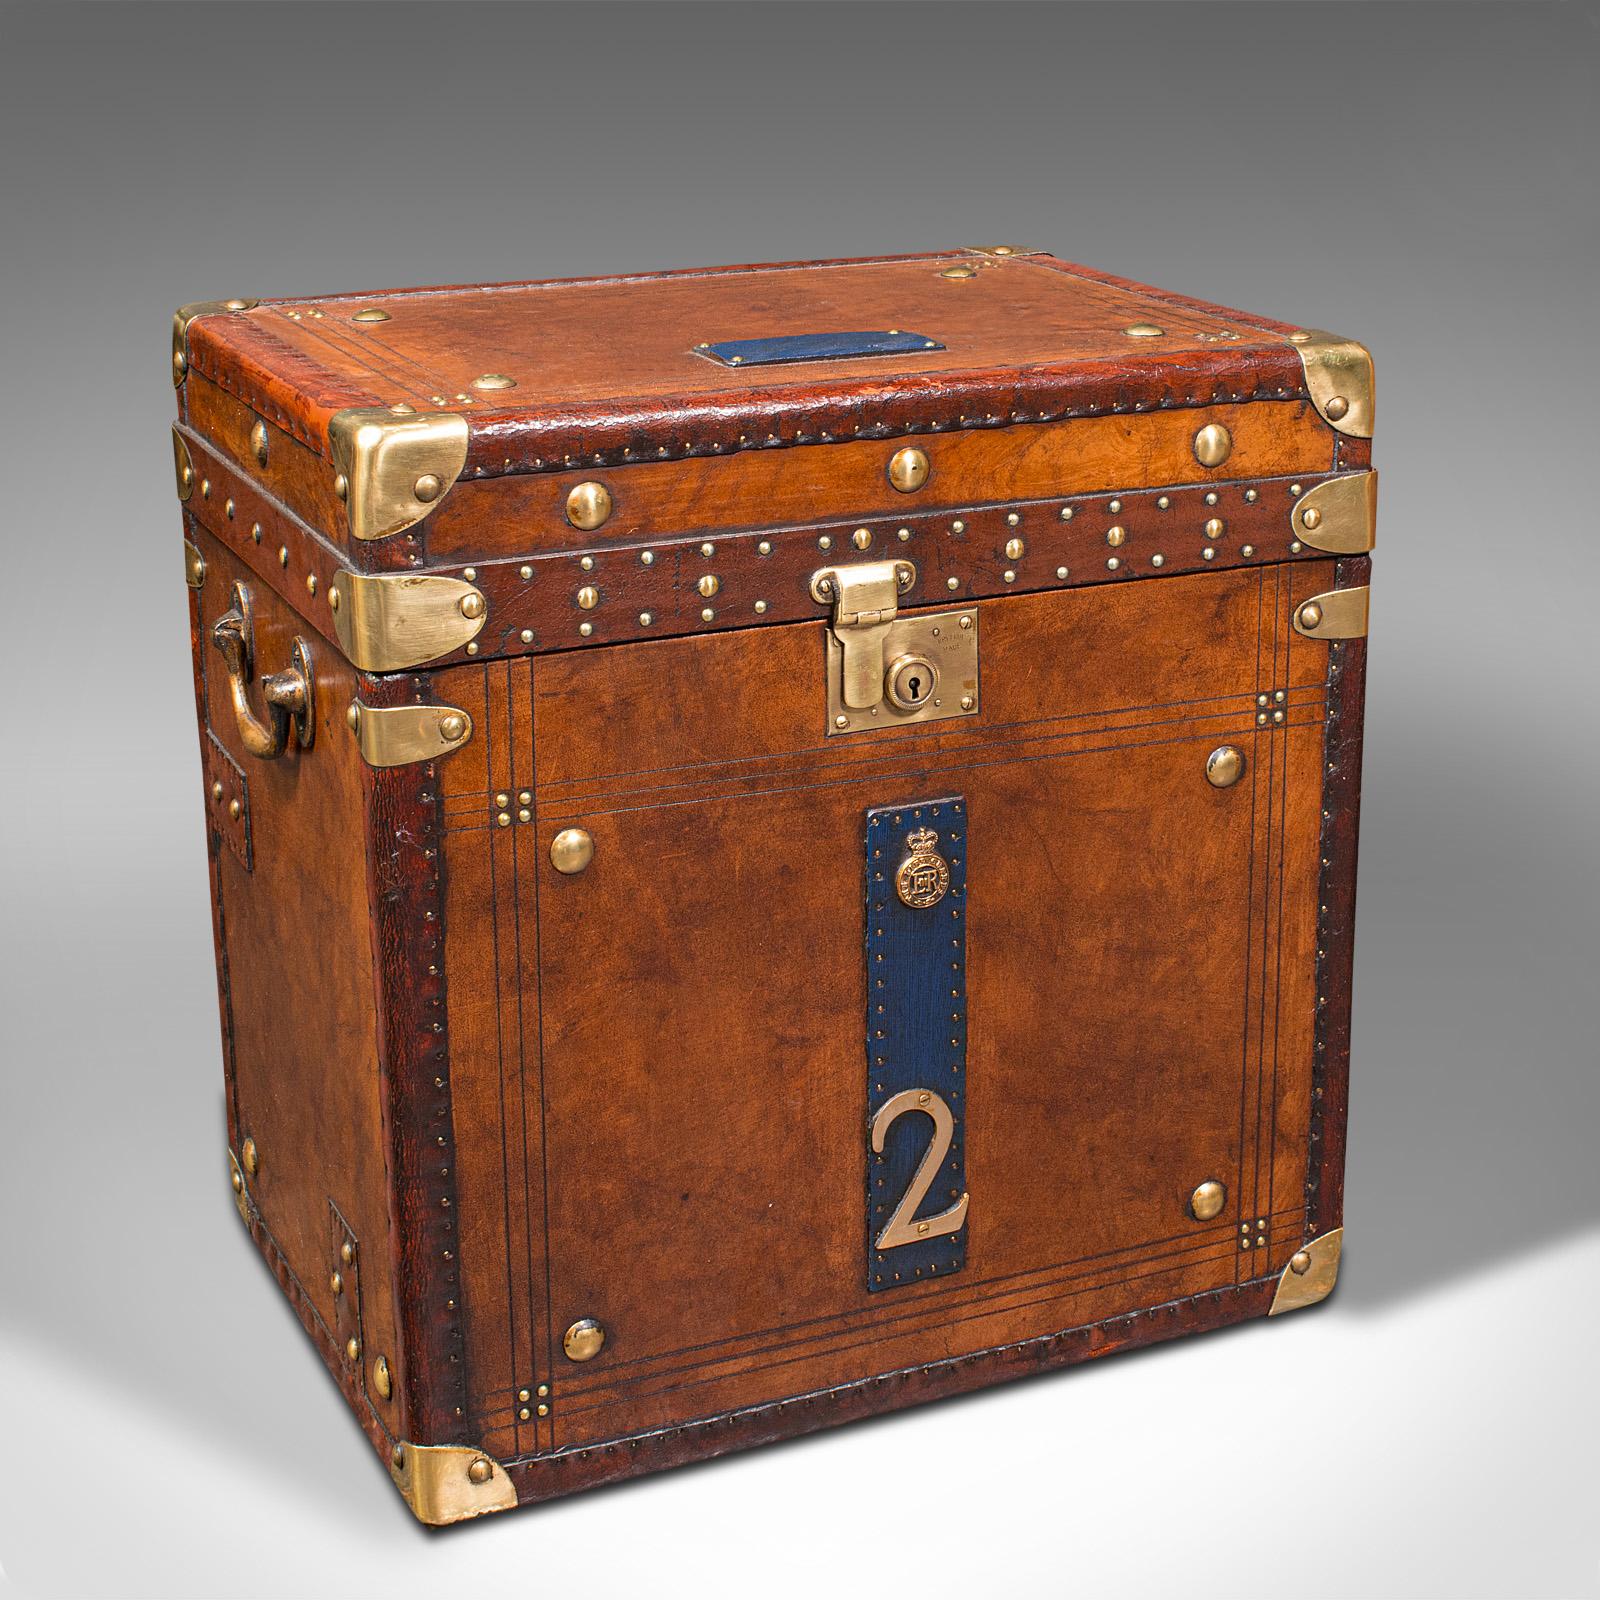 20th Century Pair of Vintage Campaign Luggage Cases, English, Leather, Military, Nightstands